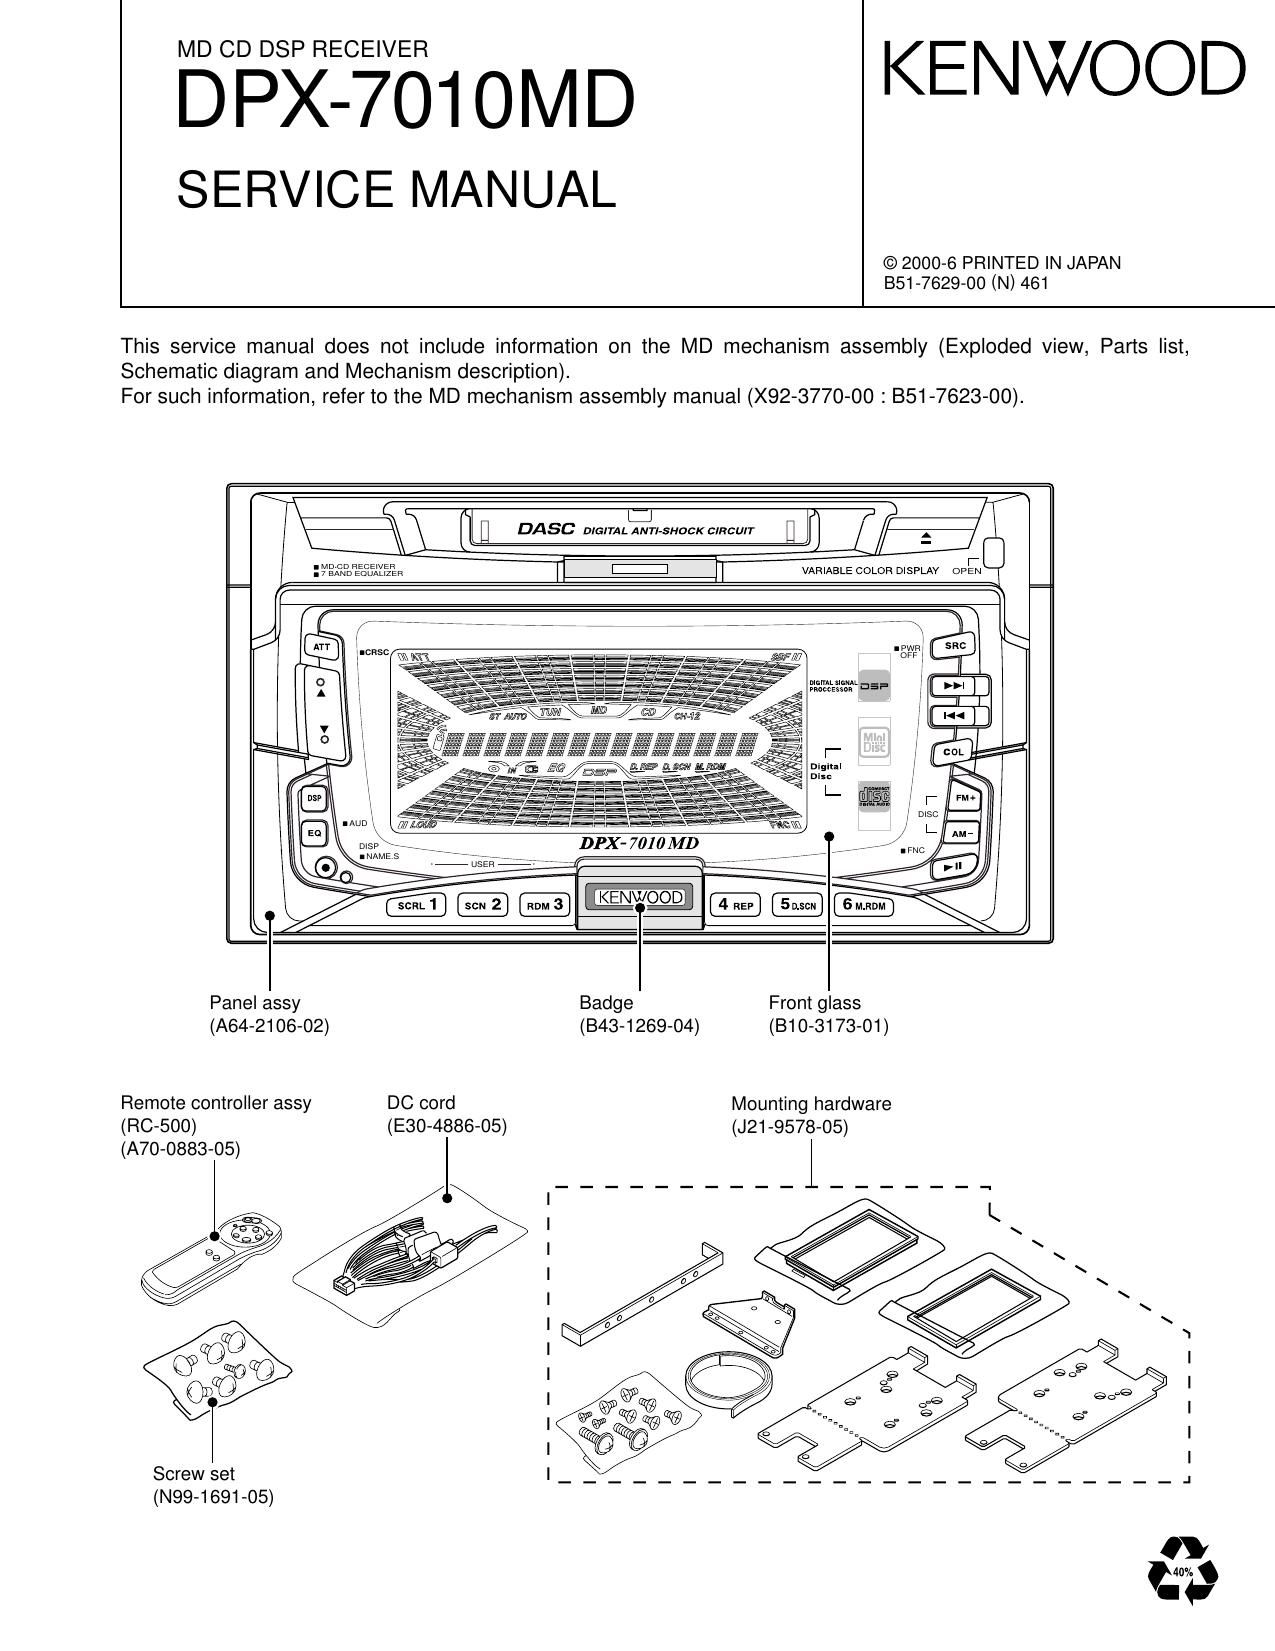 Kenwood DPX 7010 MD Service Manual